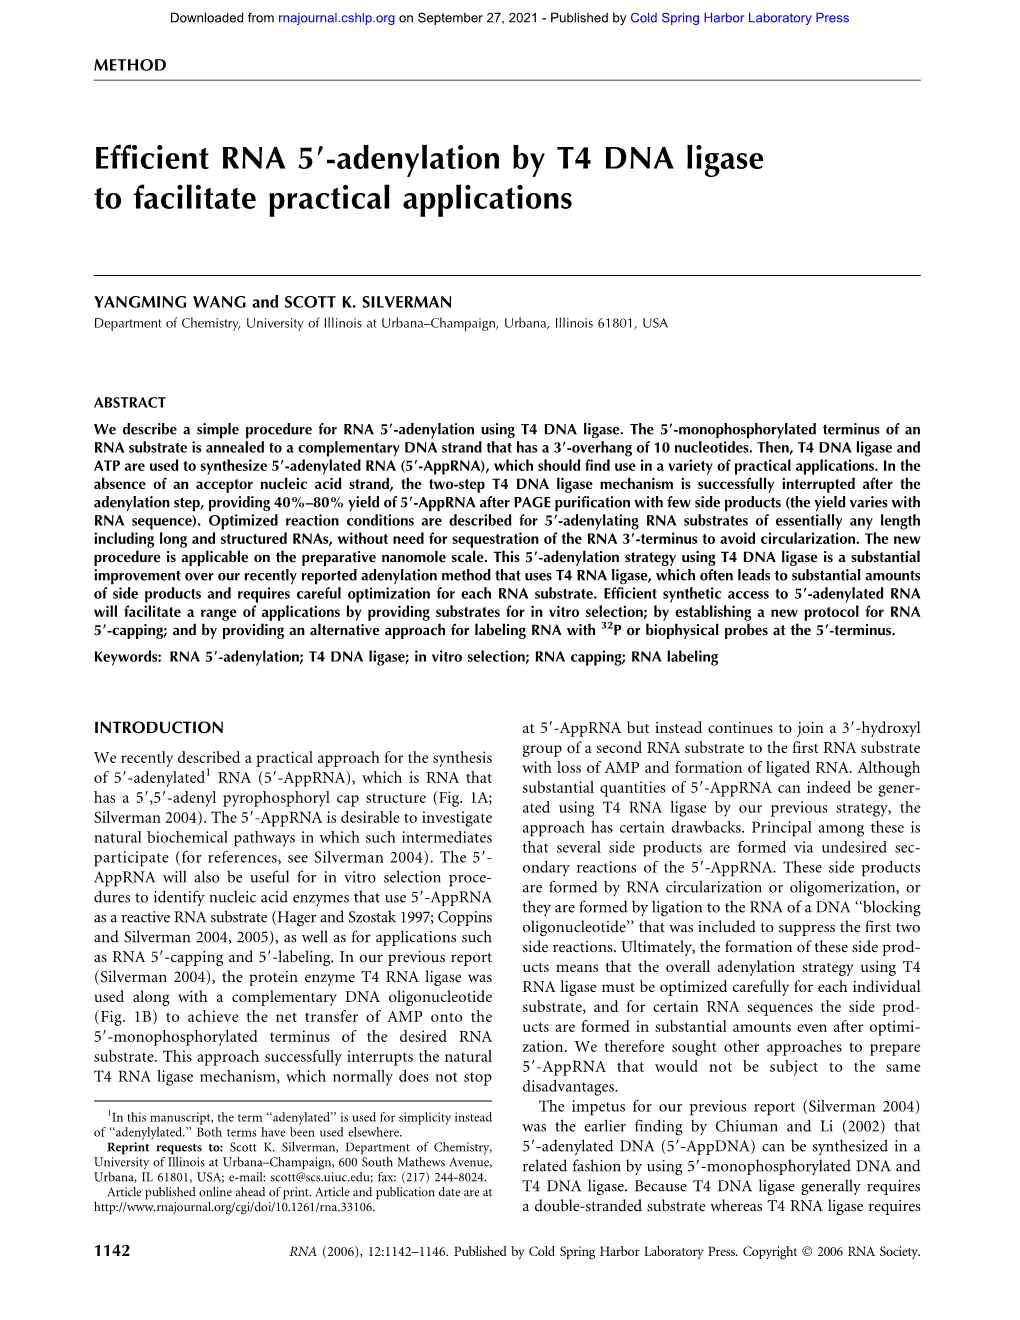 Efficient RNA 59-Adenylation by T4 DNA Ligase to Facilitate Practical Applications